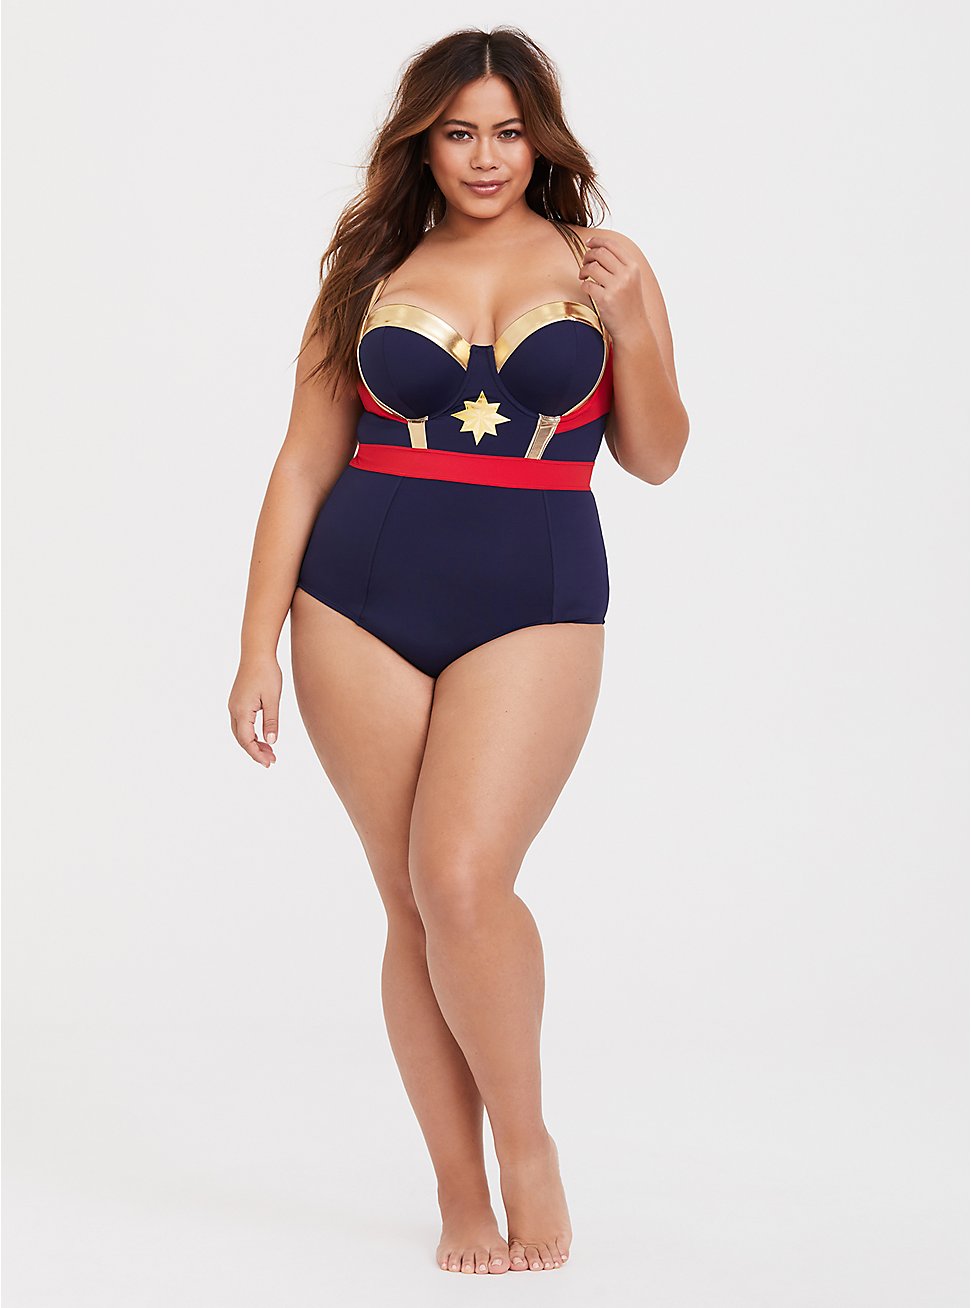 Her Universe Captain Marvel Wireless One-Piece Swimsuit, MULTI, hi-res